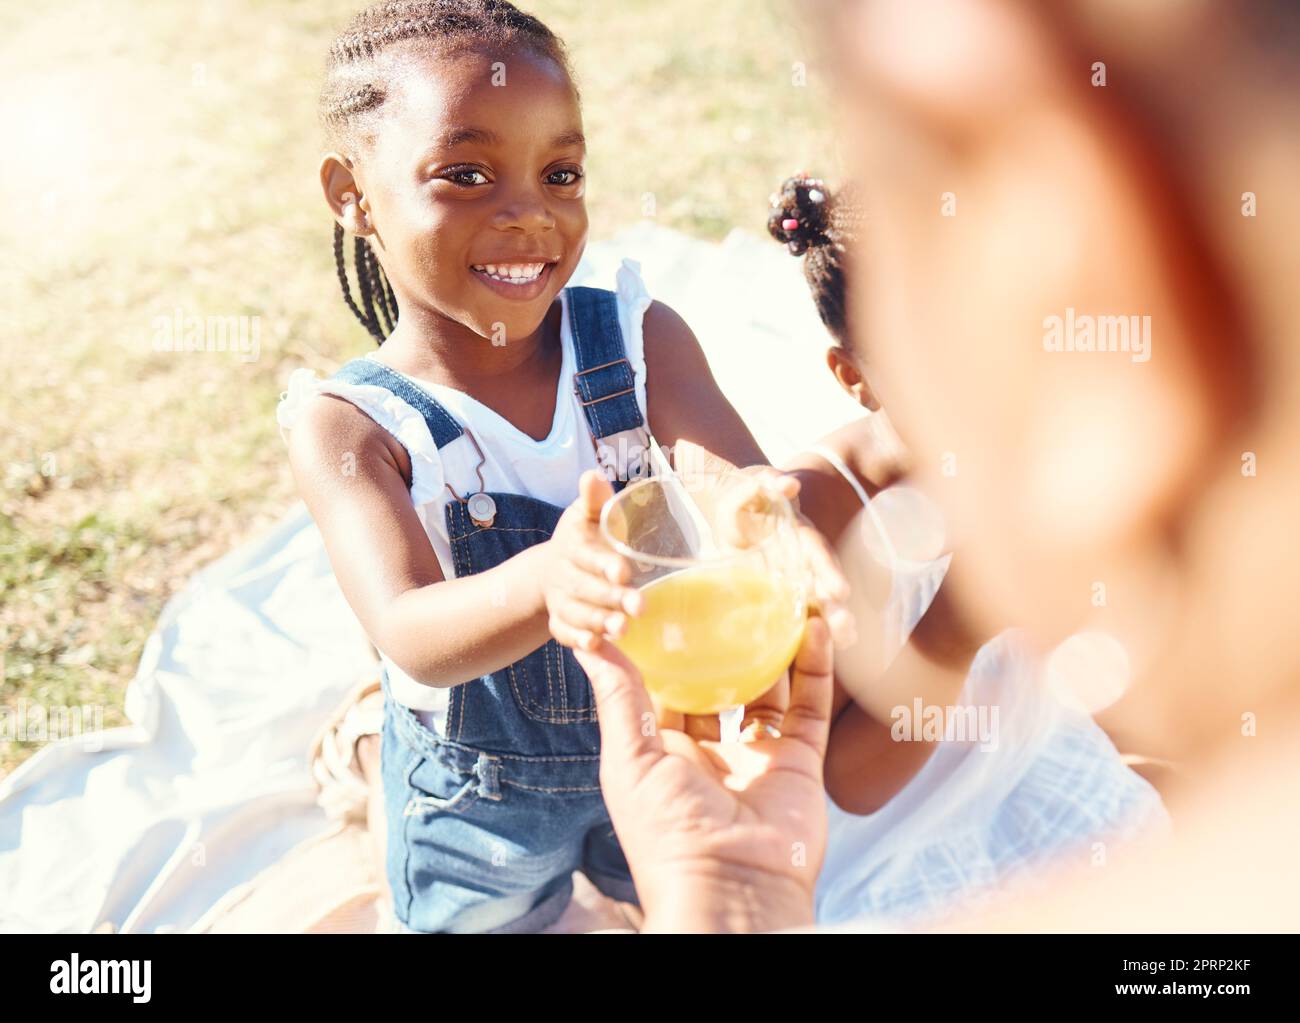 Happy girl, juice and smile in family picnic fun and joy in happiness on a warm summer day in nature. Black child smiling for fresh cold healthy beverage in the hot outdoors with parent and sibling Stock Photo